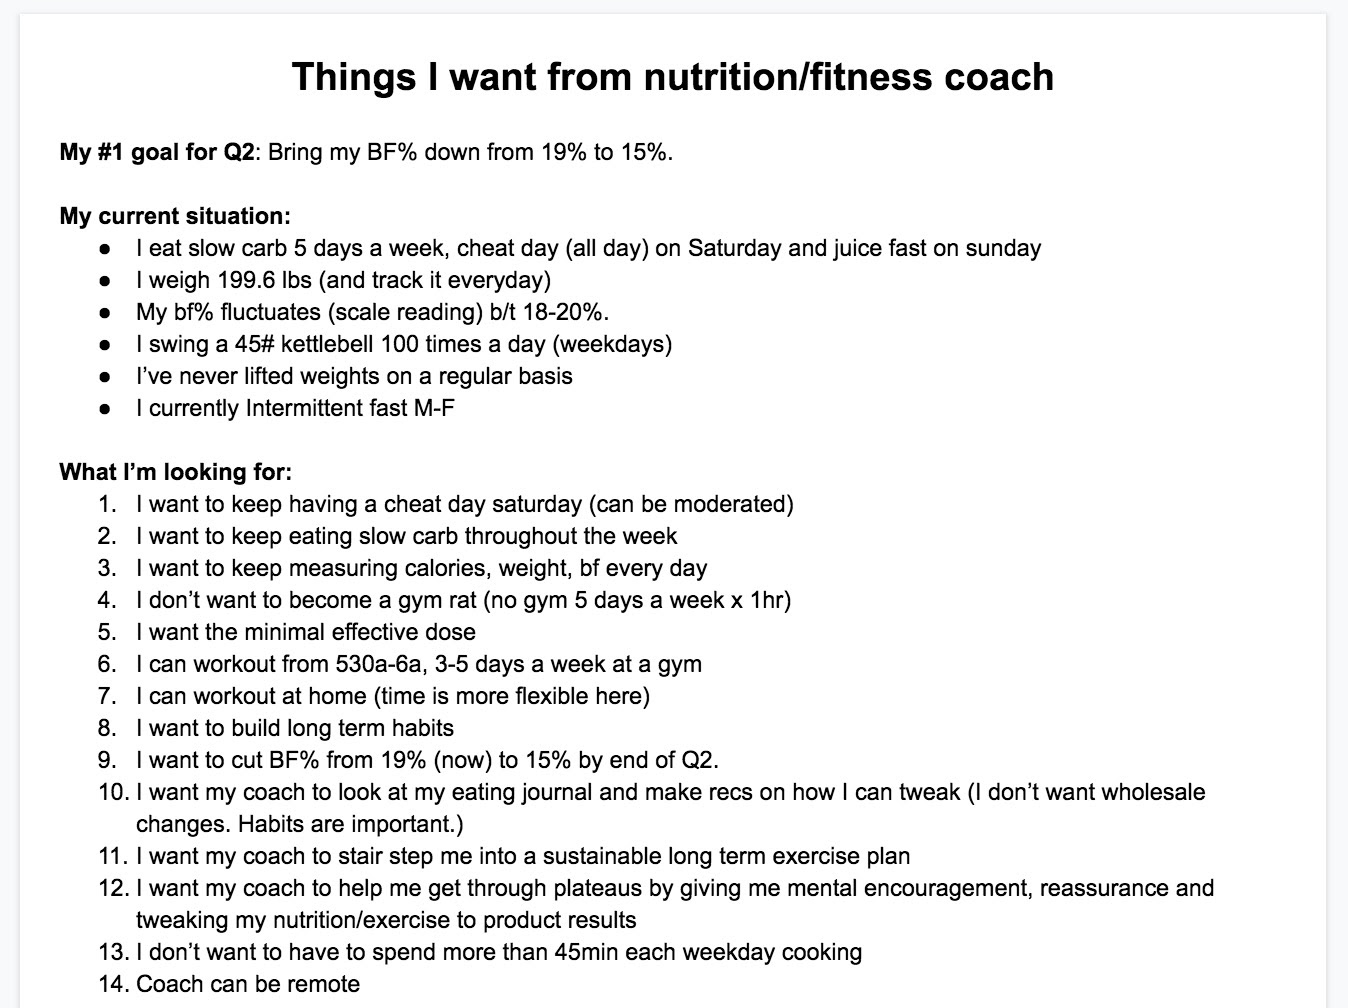 Things I Want From a Nutrition/ Fitness Coach